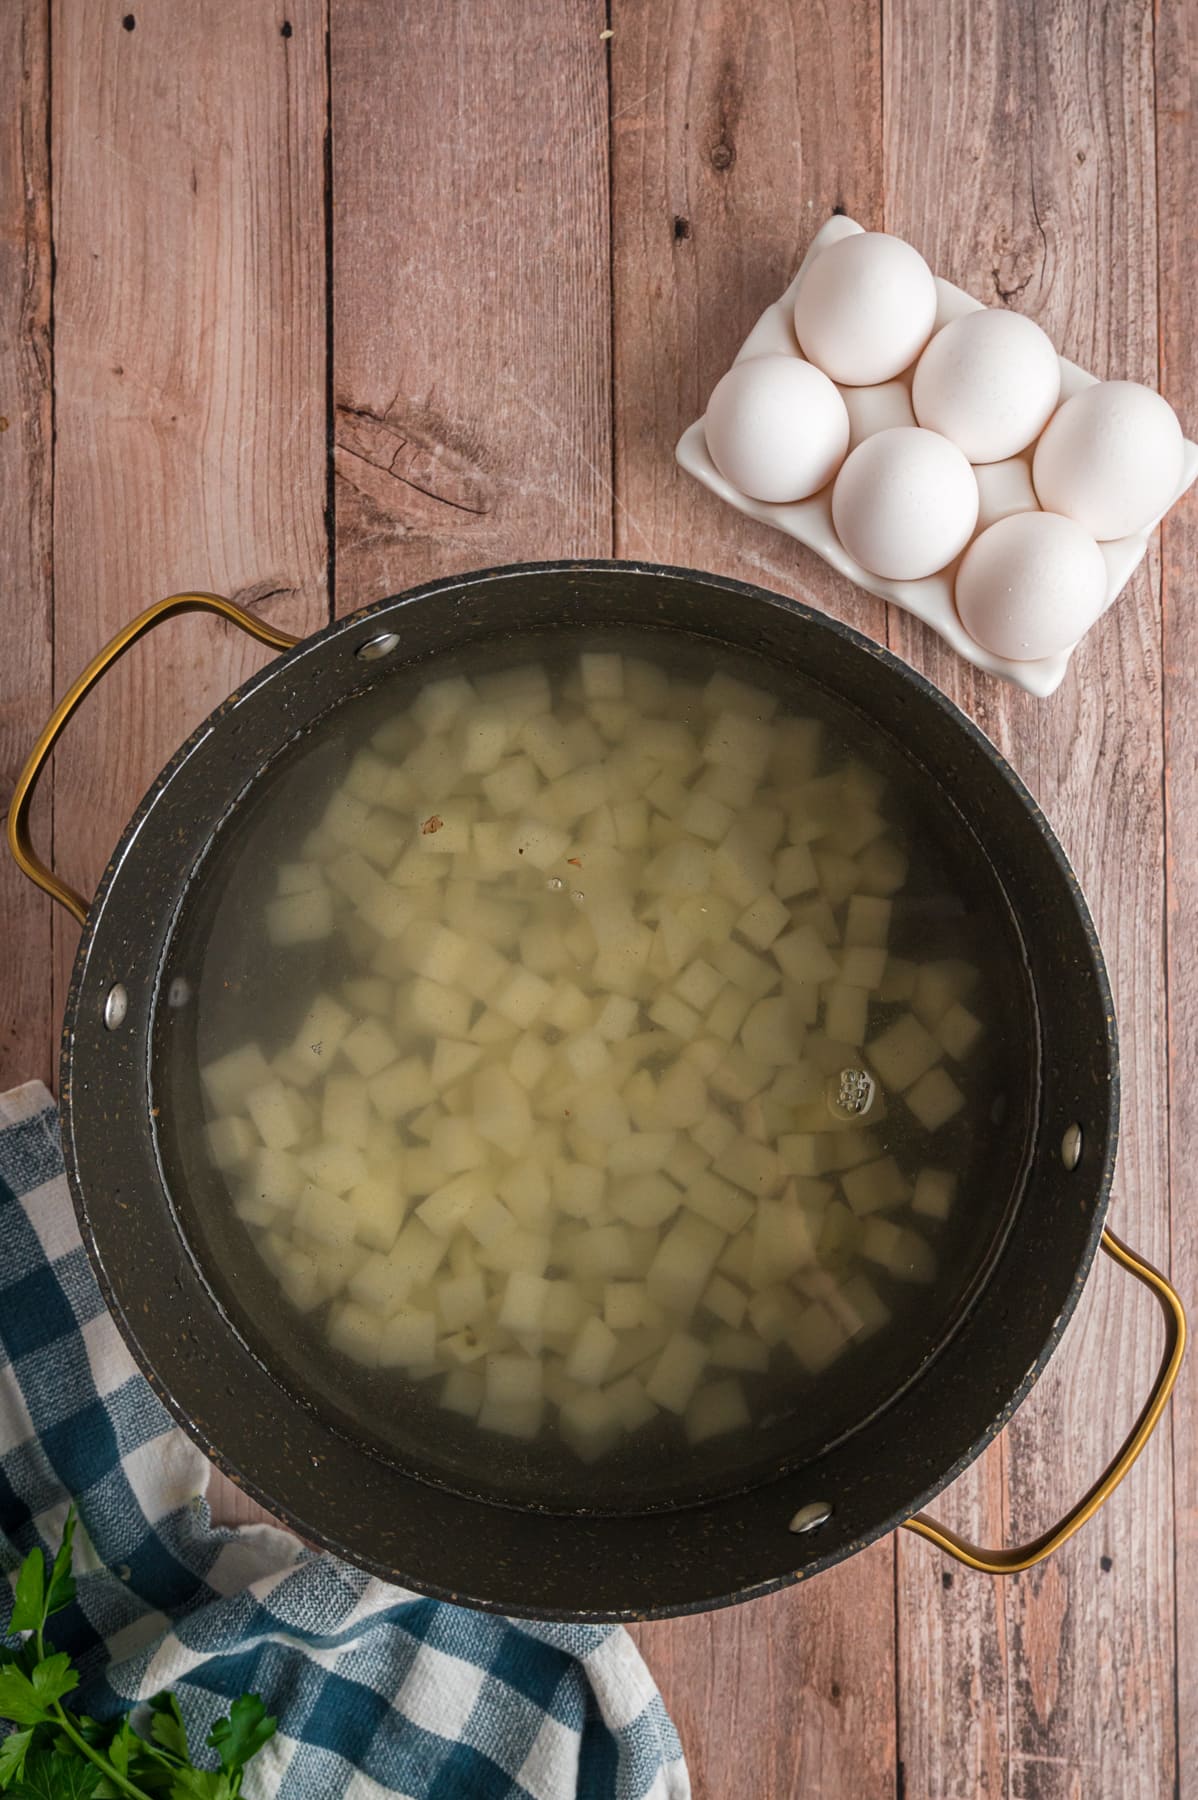 Diced potatoes in a cooking pot.